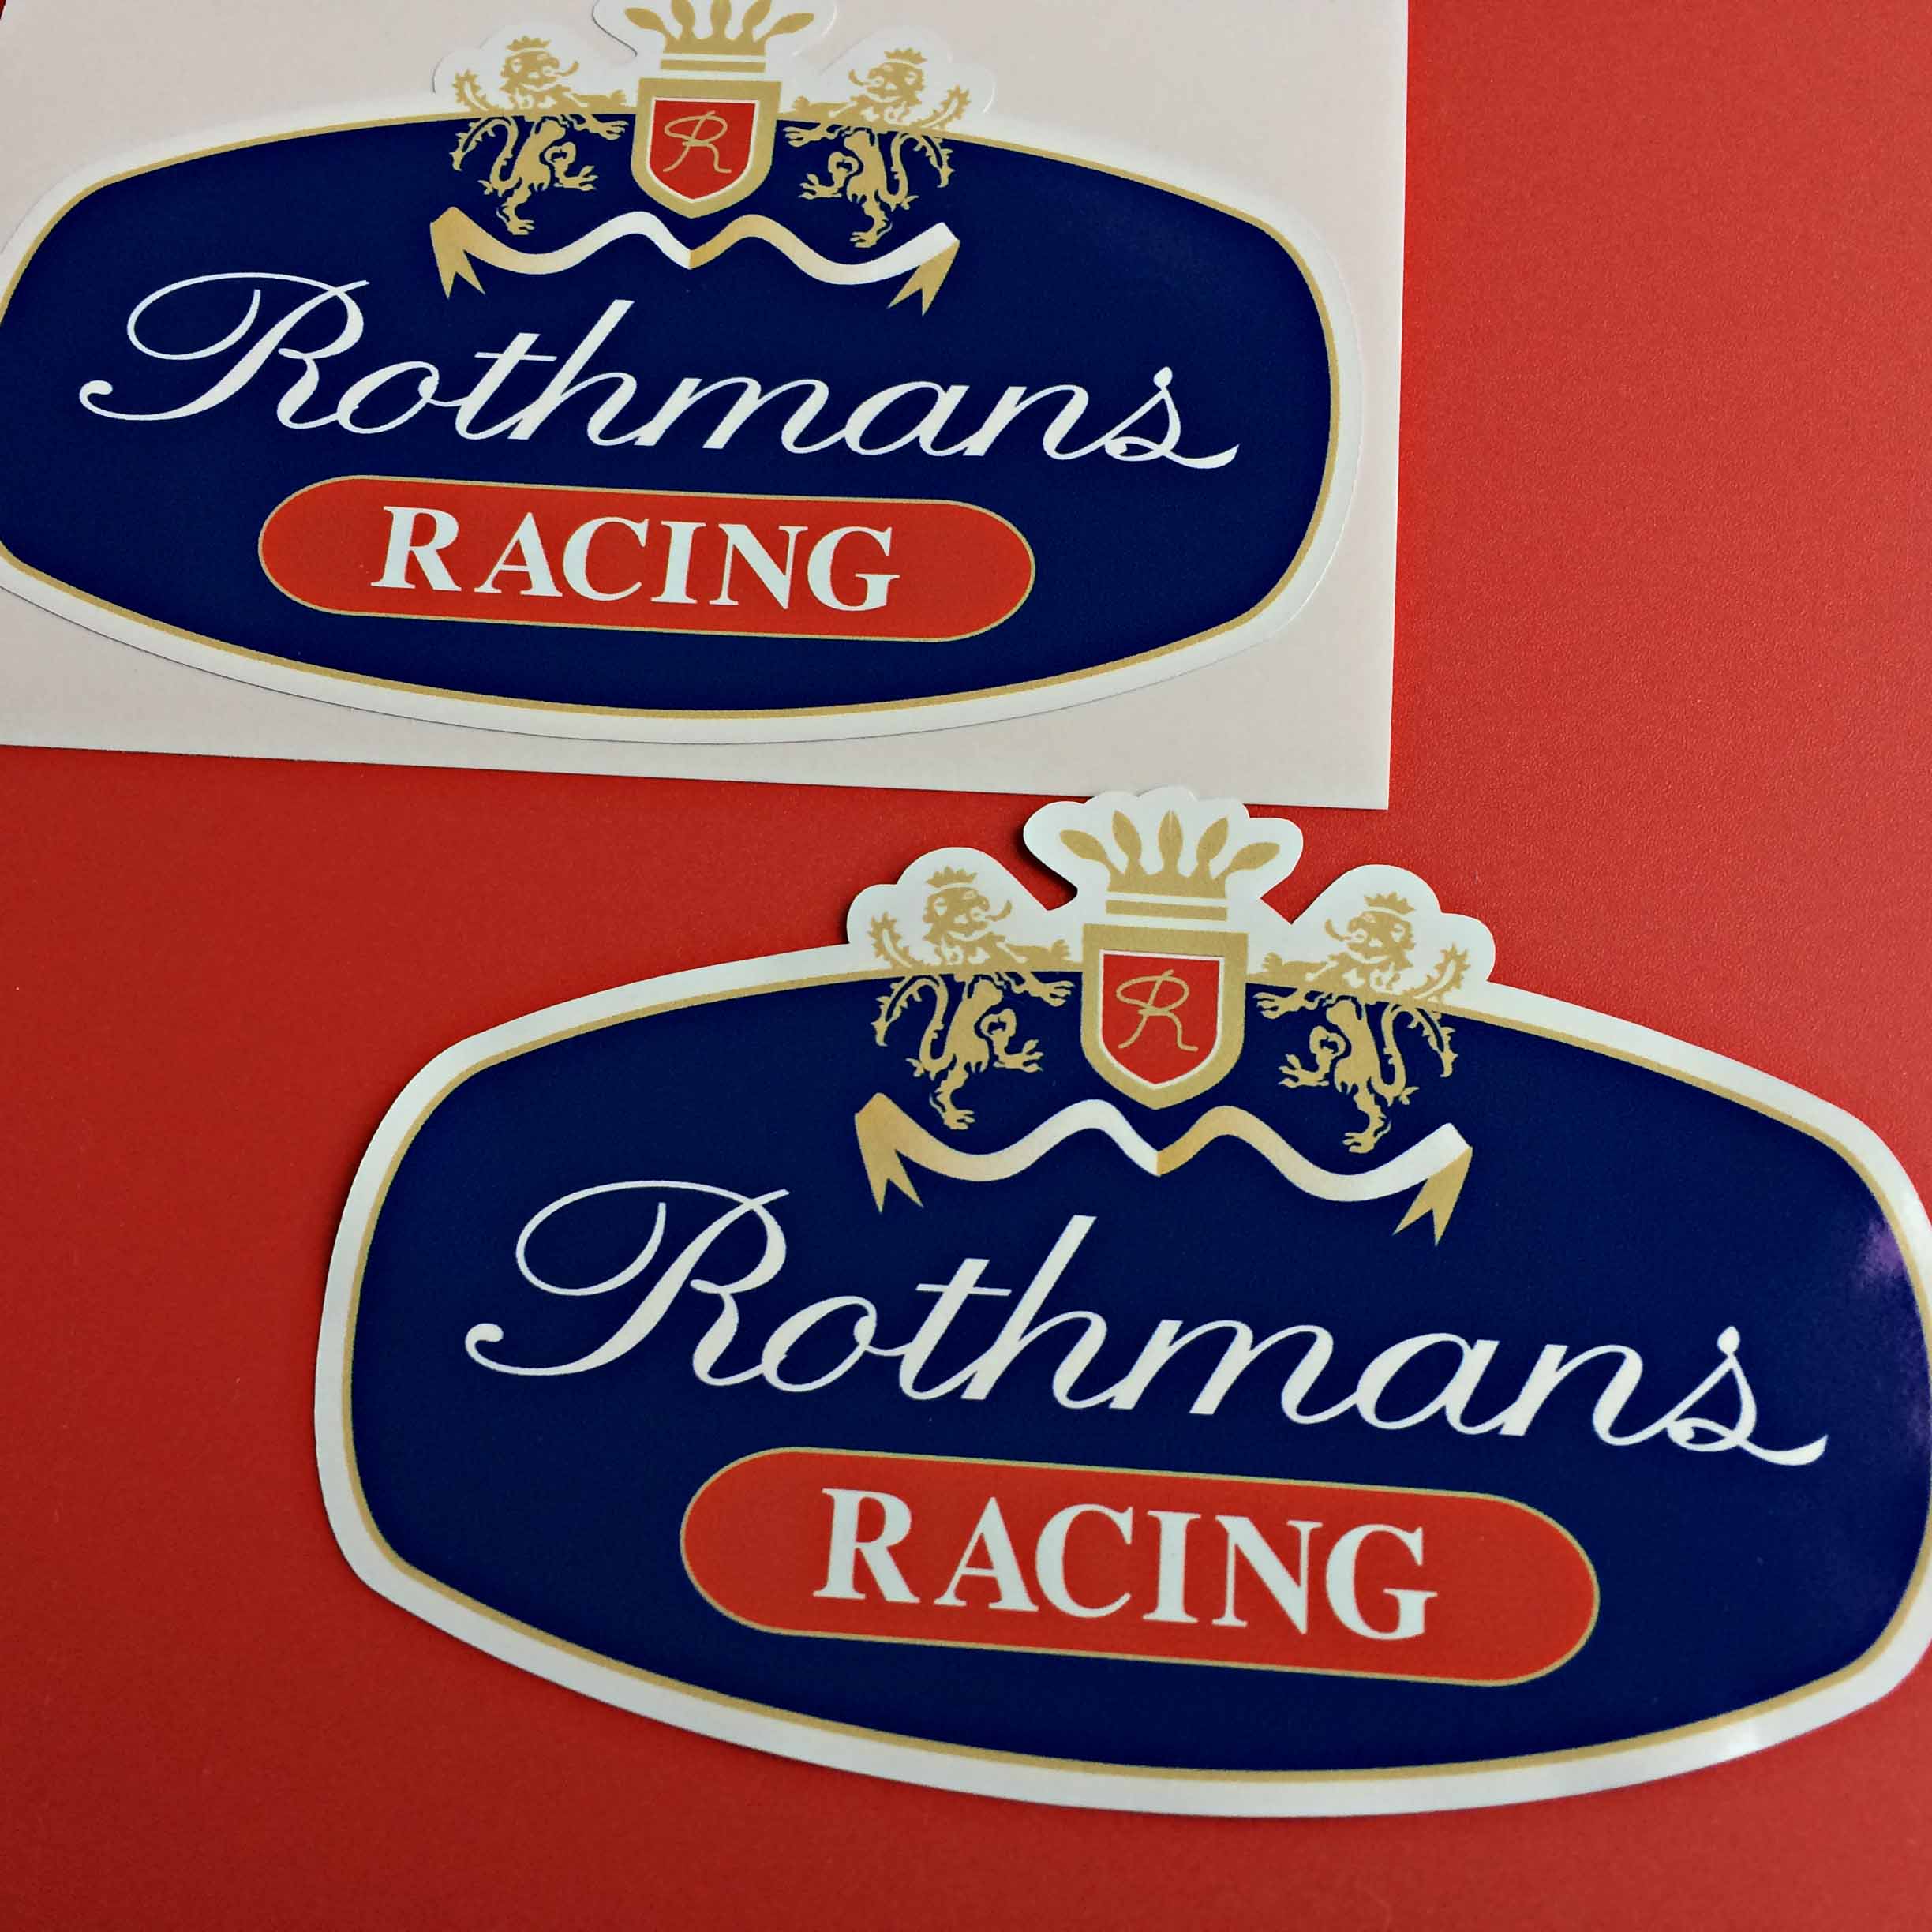 Rothmans Racing in white lettering on a blue and red background. Two golden lions are either side of a crown and shield. The shield has a gold letter R on a red background.